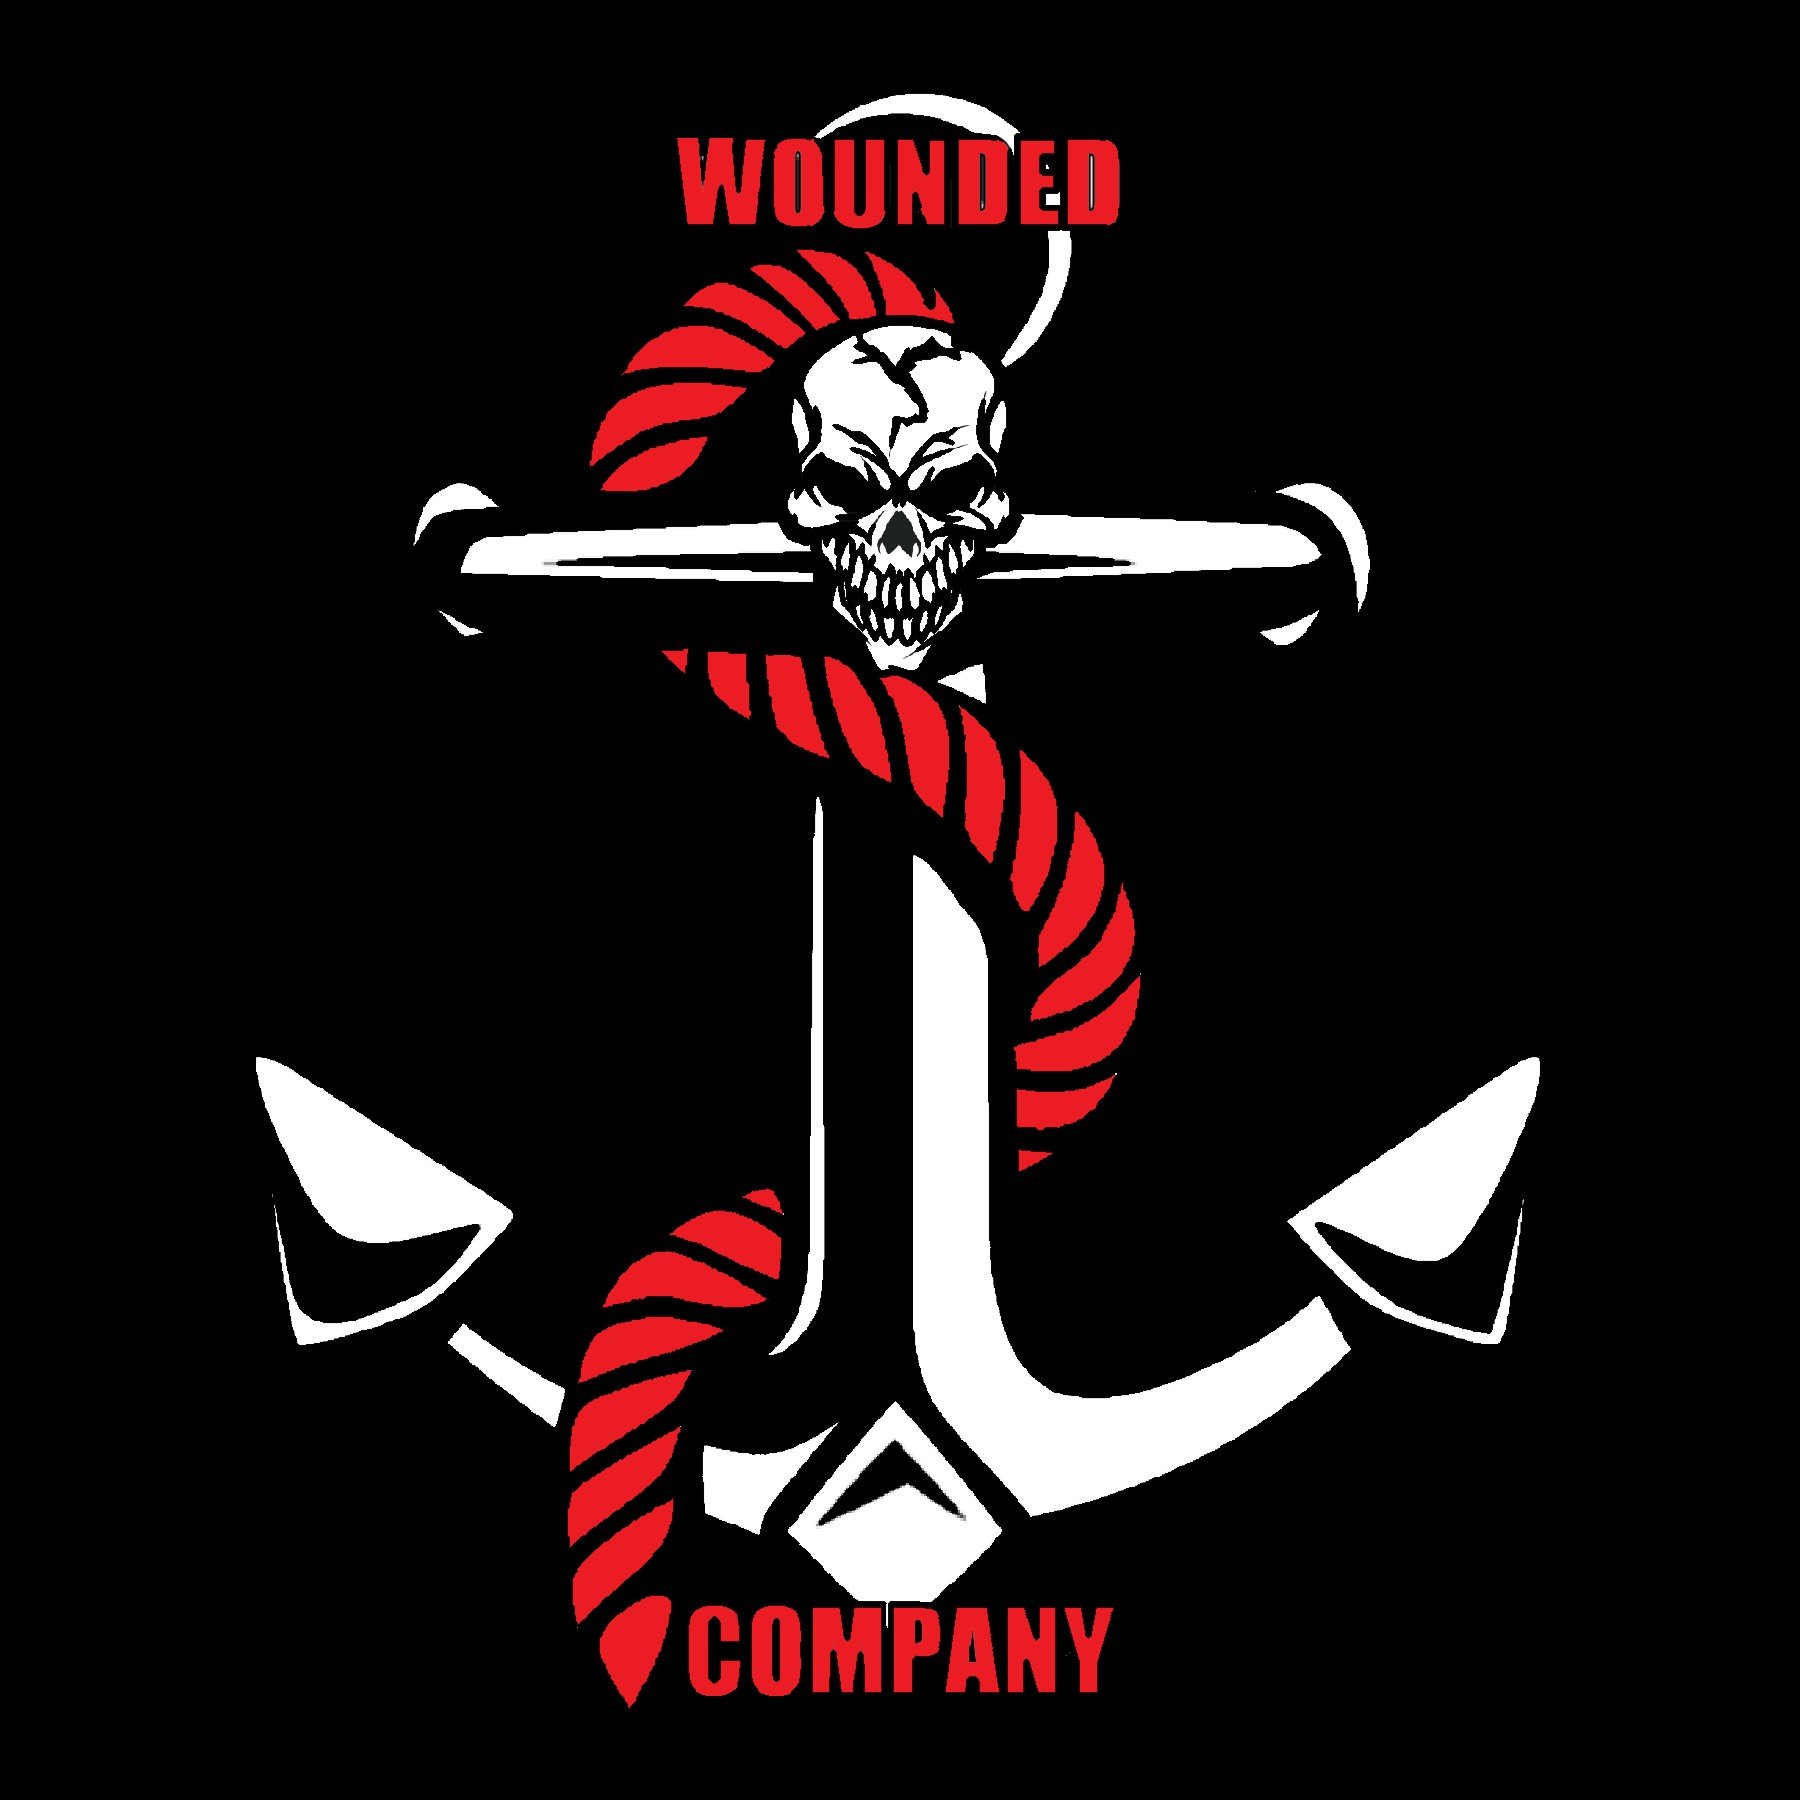 Wounded Company